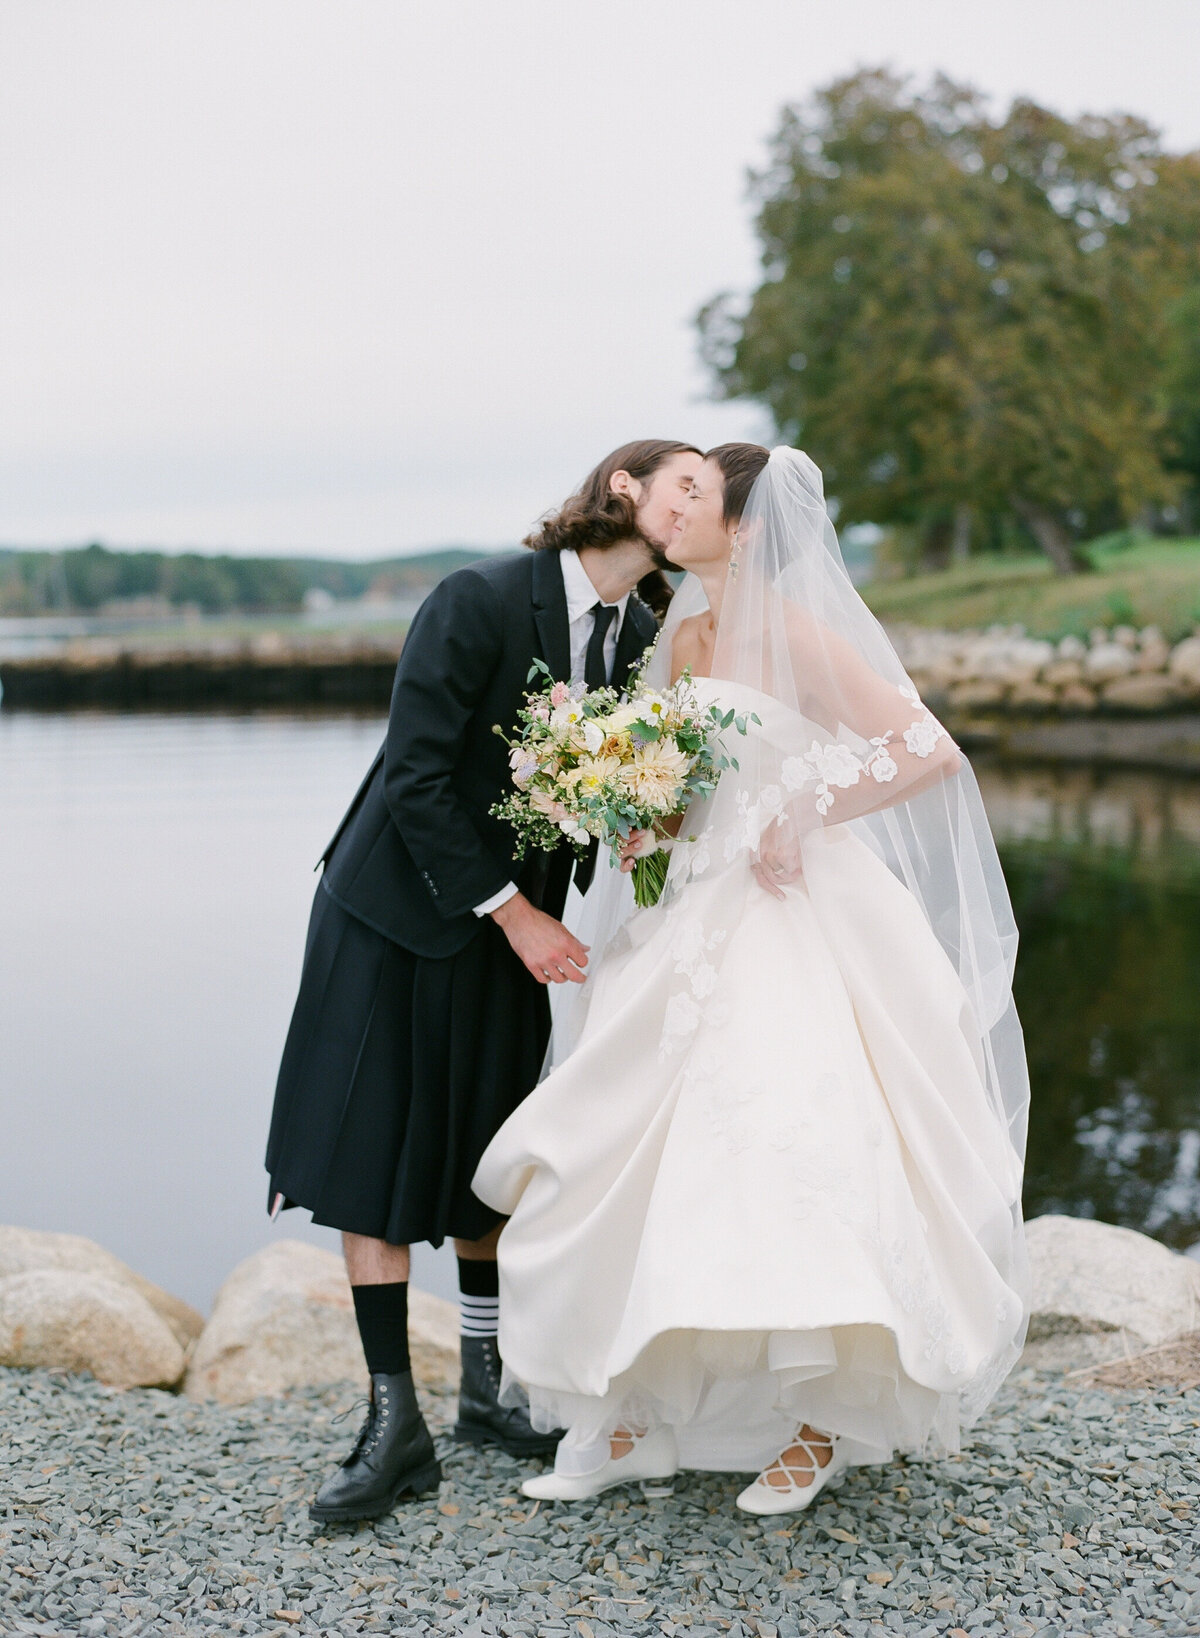 Jacqueline Anne Photography - Halifax Wedding Photographer - Lizzie and Miles-60